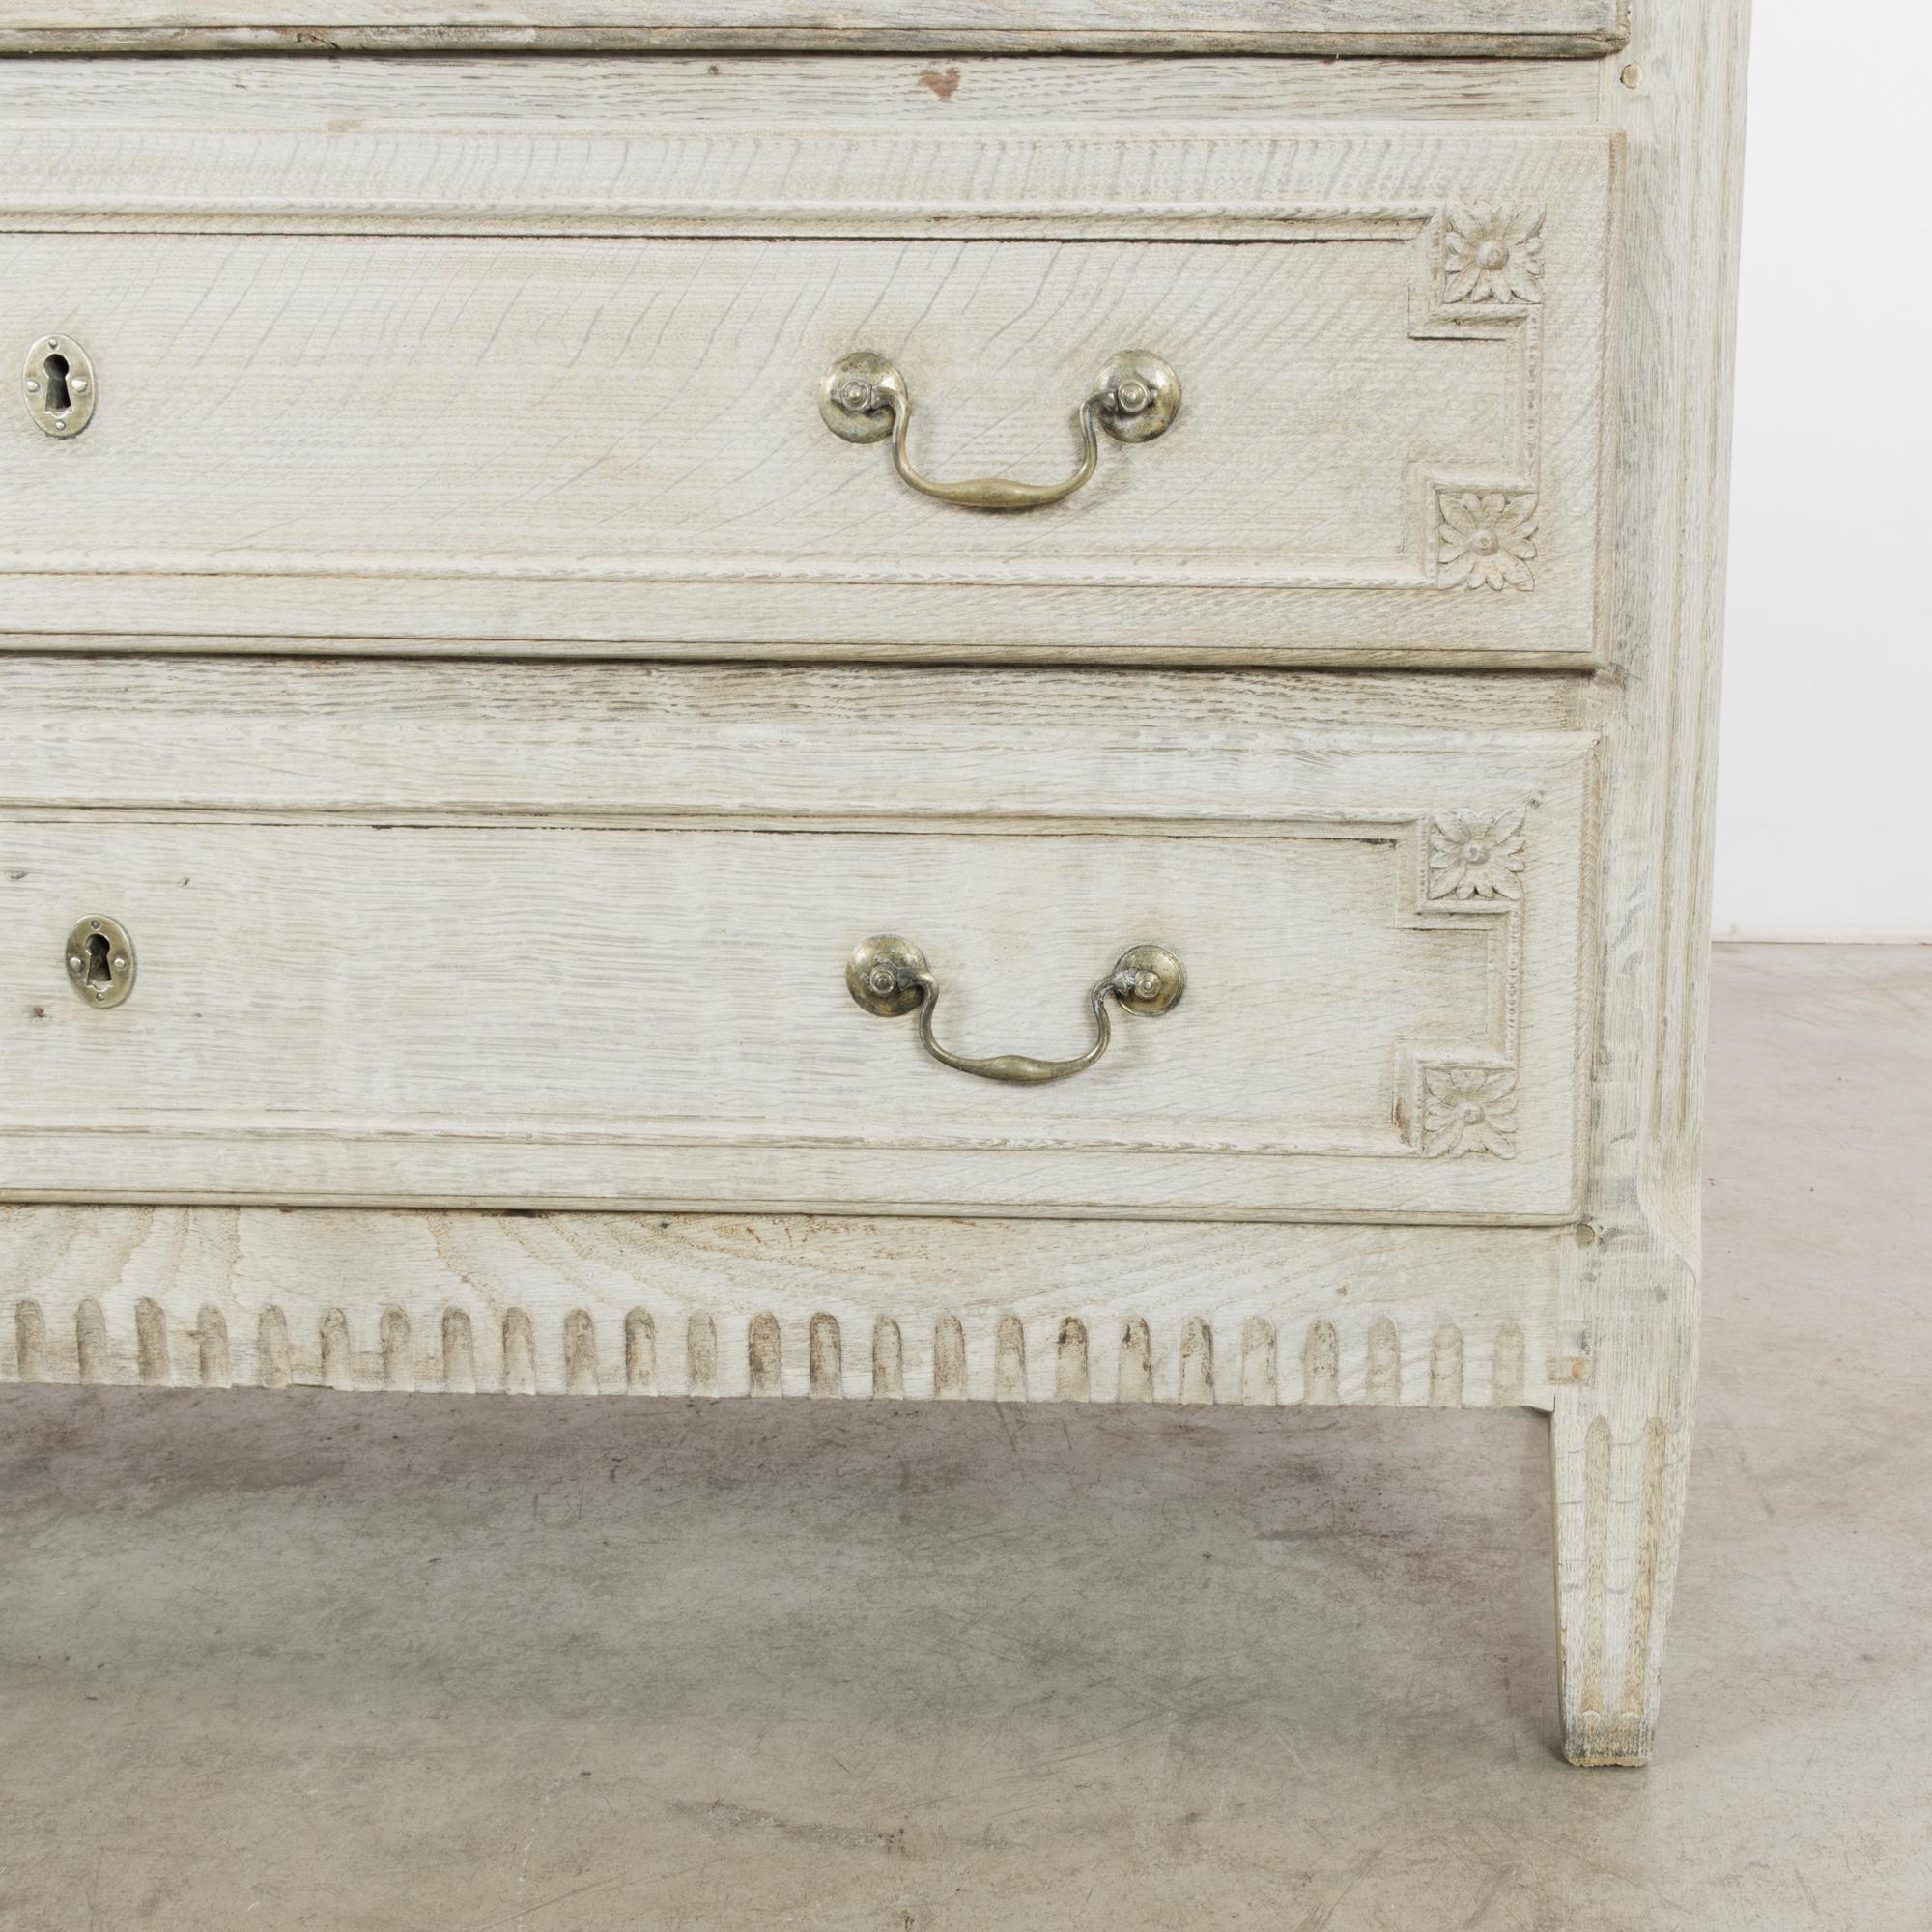 An antique chest of drawers from 1880s France. The oak has been restored to an ivory finish; gilded drop handles bring out the delicate tone. The upright shape is enhanced by elegant Neoclassical ornament. Carved rosettes frame the panels of the